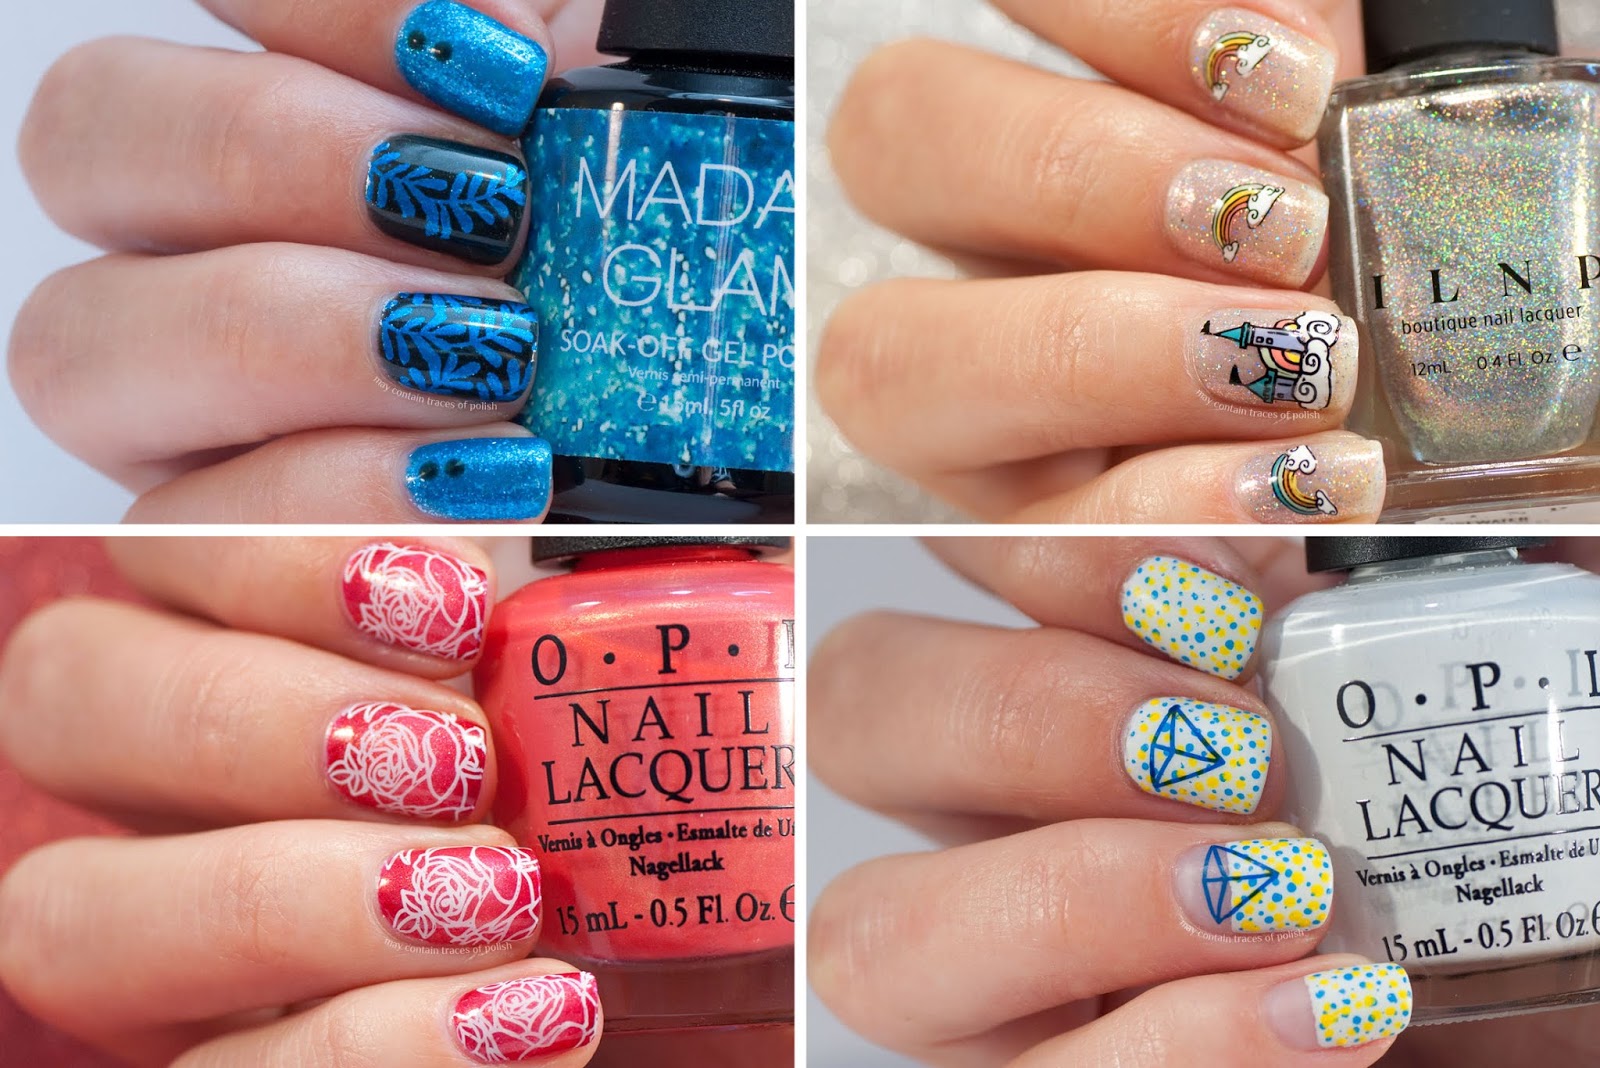 31 Day Challenge: All nail art summary post